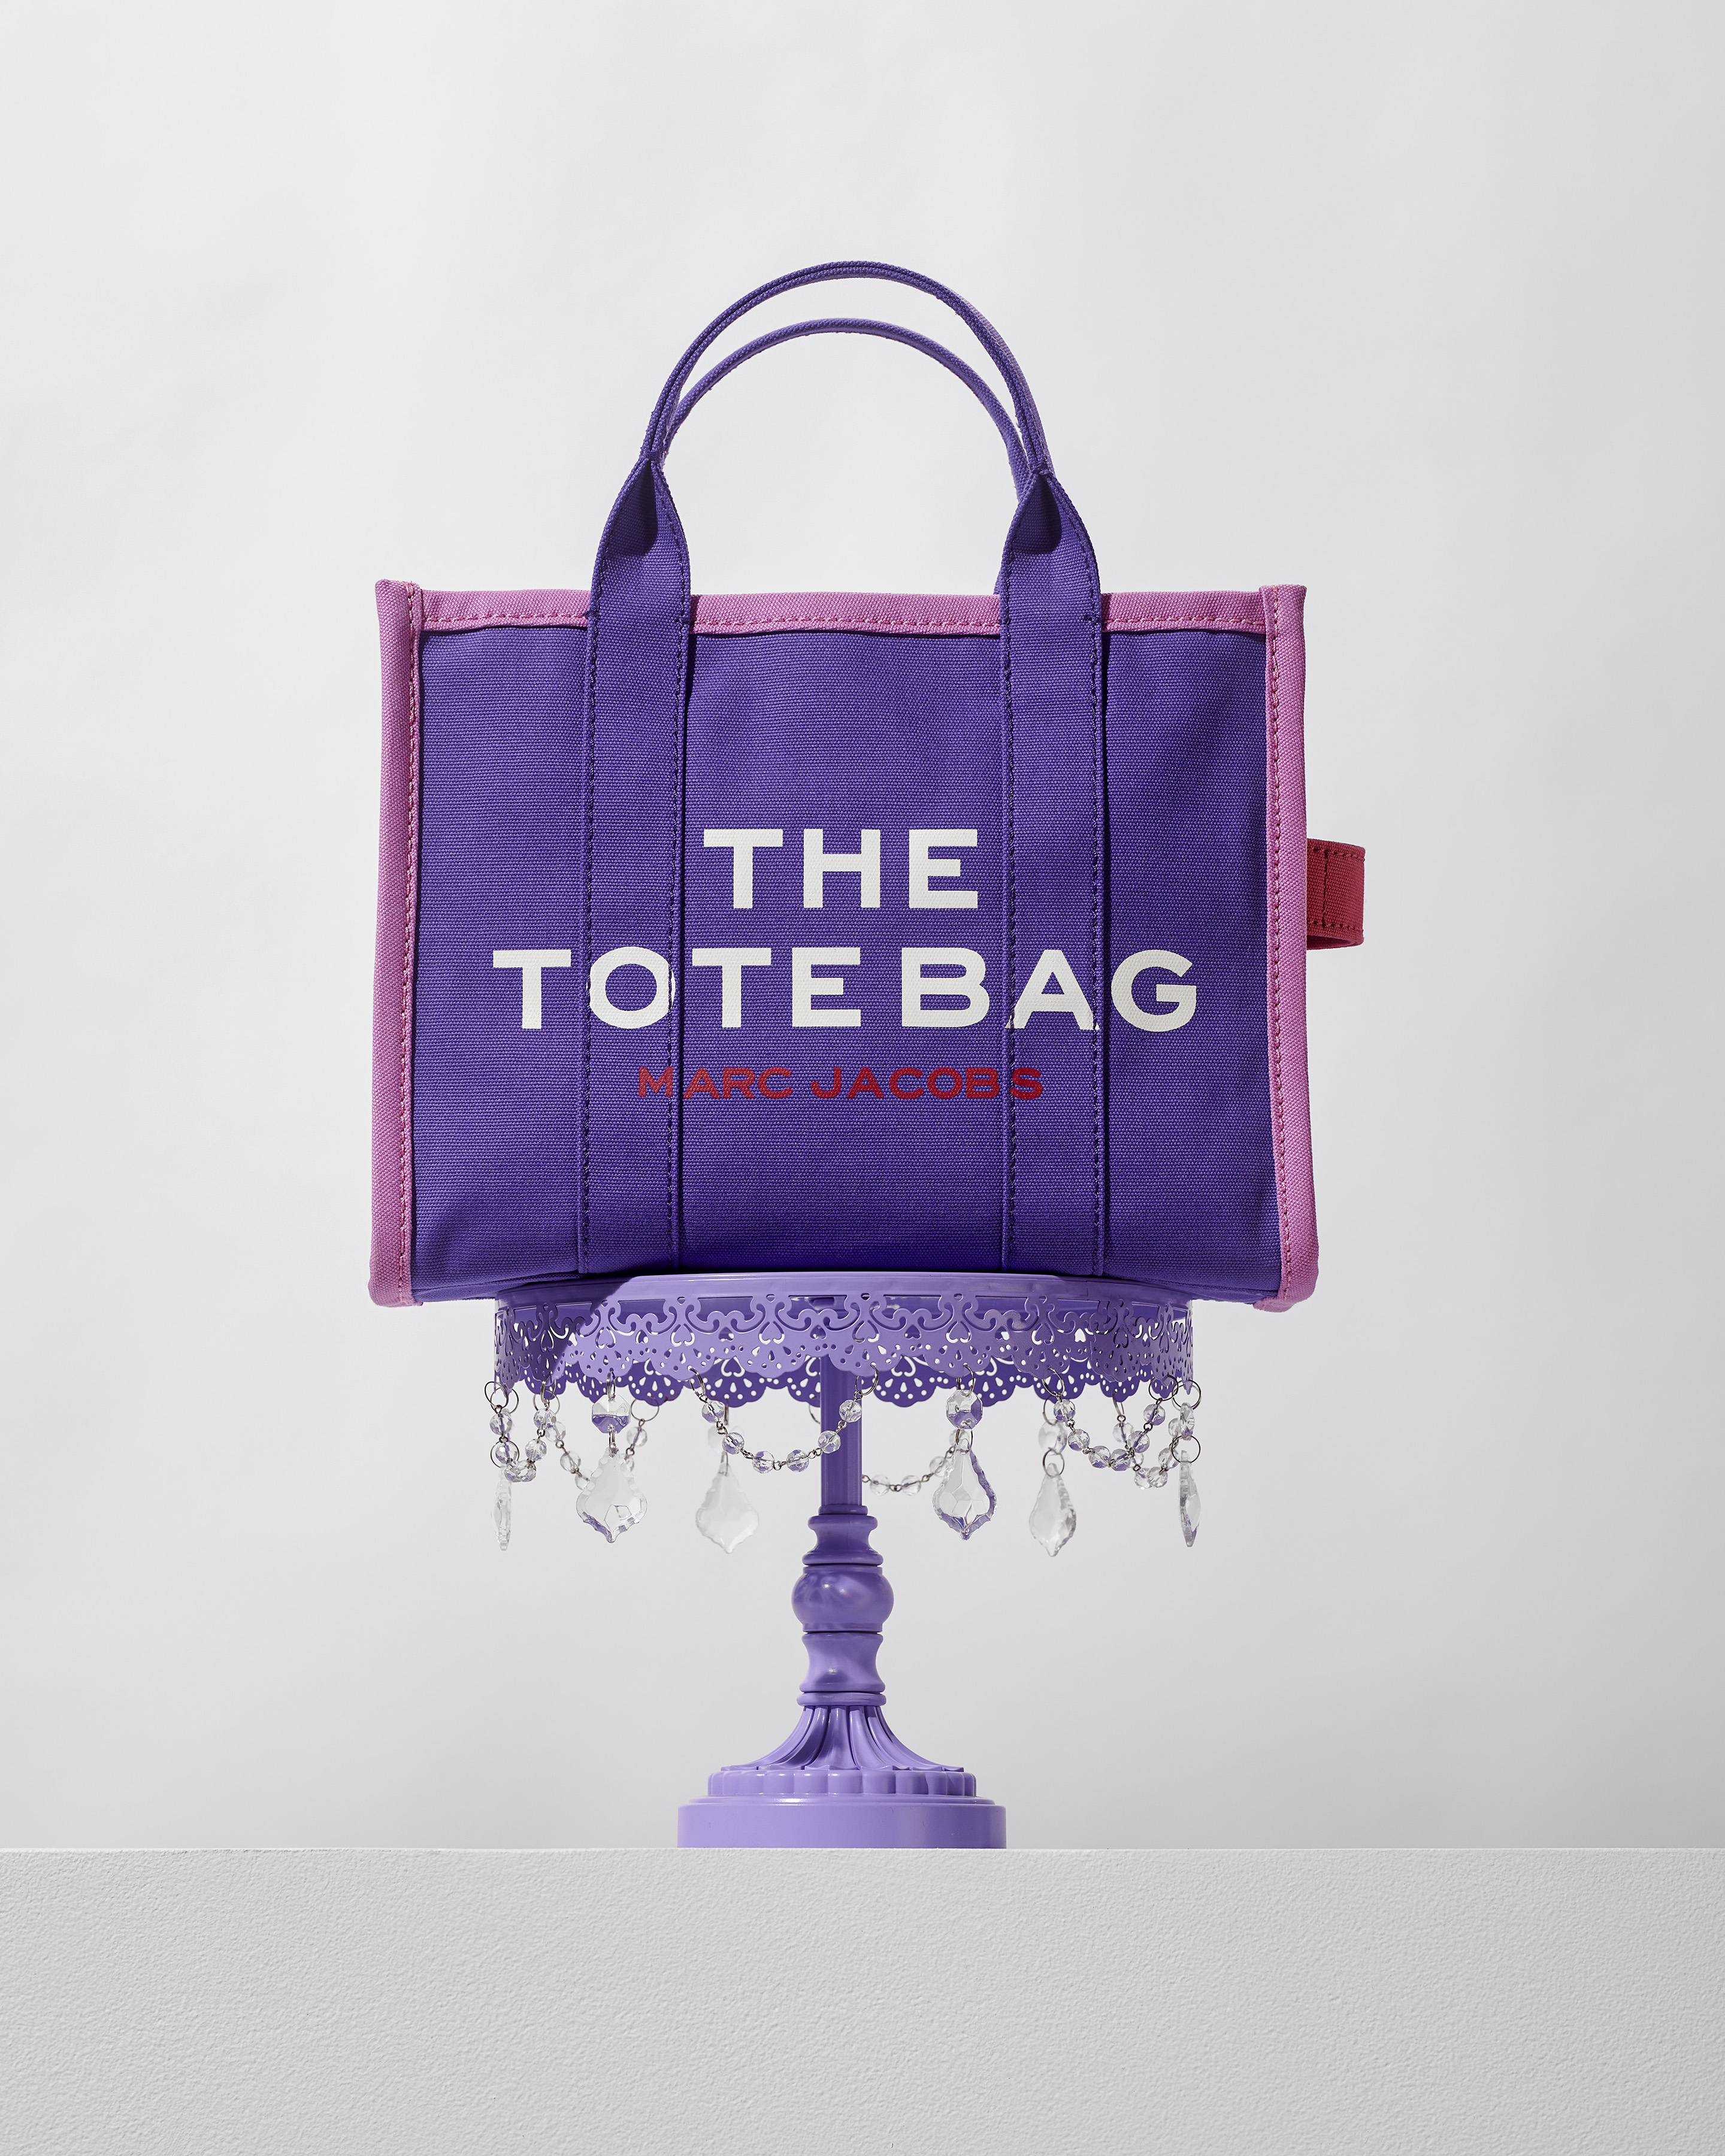 MARC JACOBSのアイコントート「THE TOTE BAG」から新デザインが多数